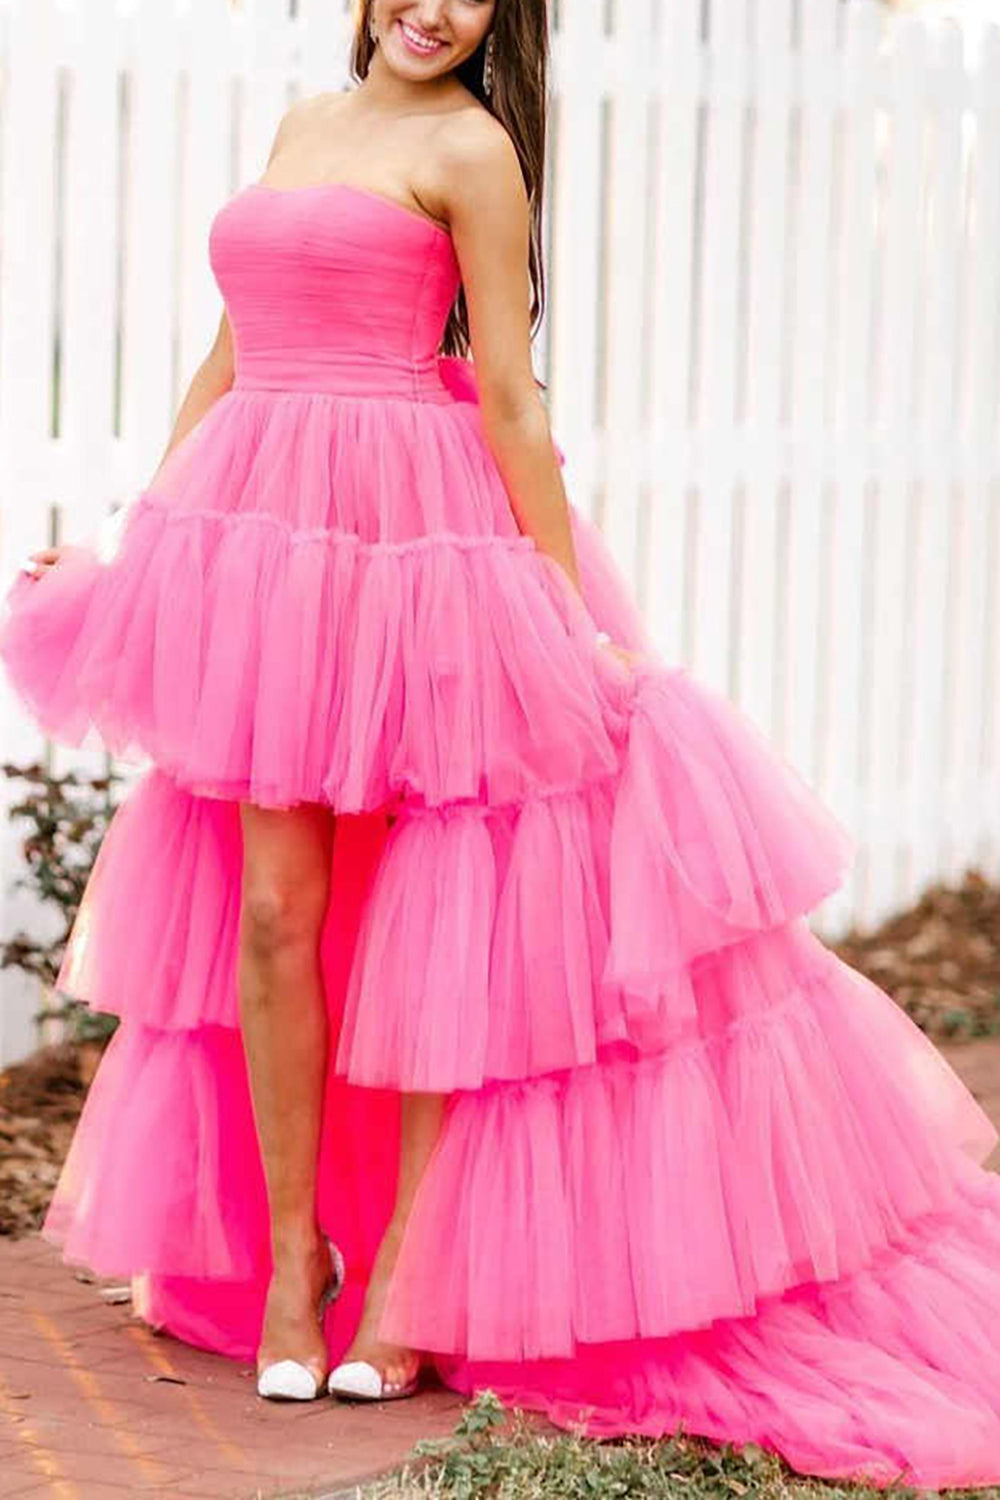 June |A-line High Low Strapless Tulle Prom Dress with Ruffles